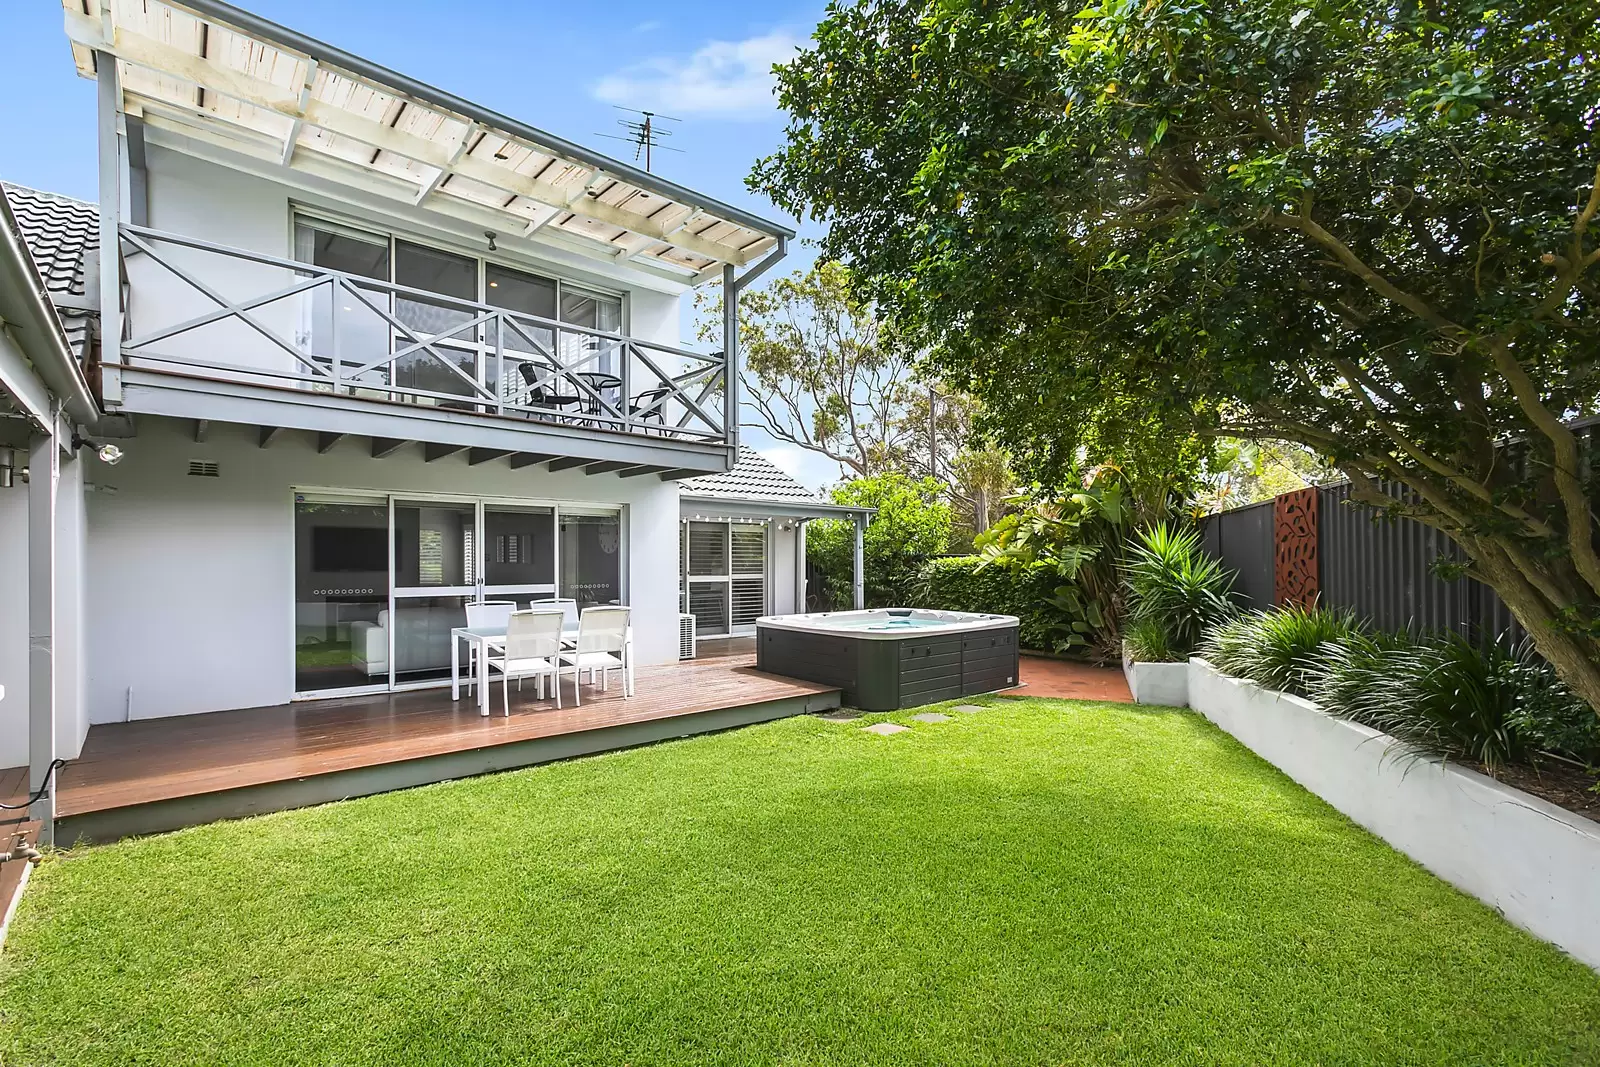 Photo #7: 23 Macarthur Avenue, Pagewood - Sold by Sydney Sotheby's International Realty